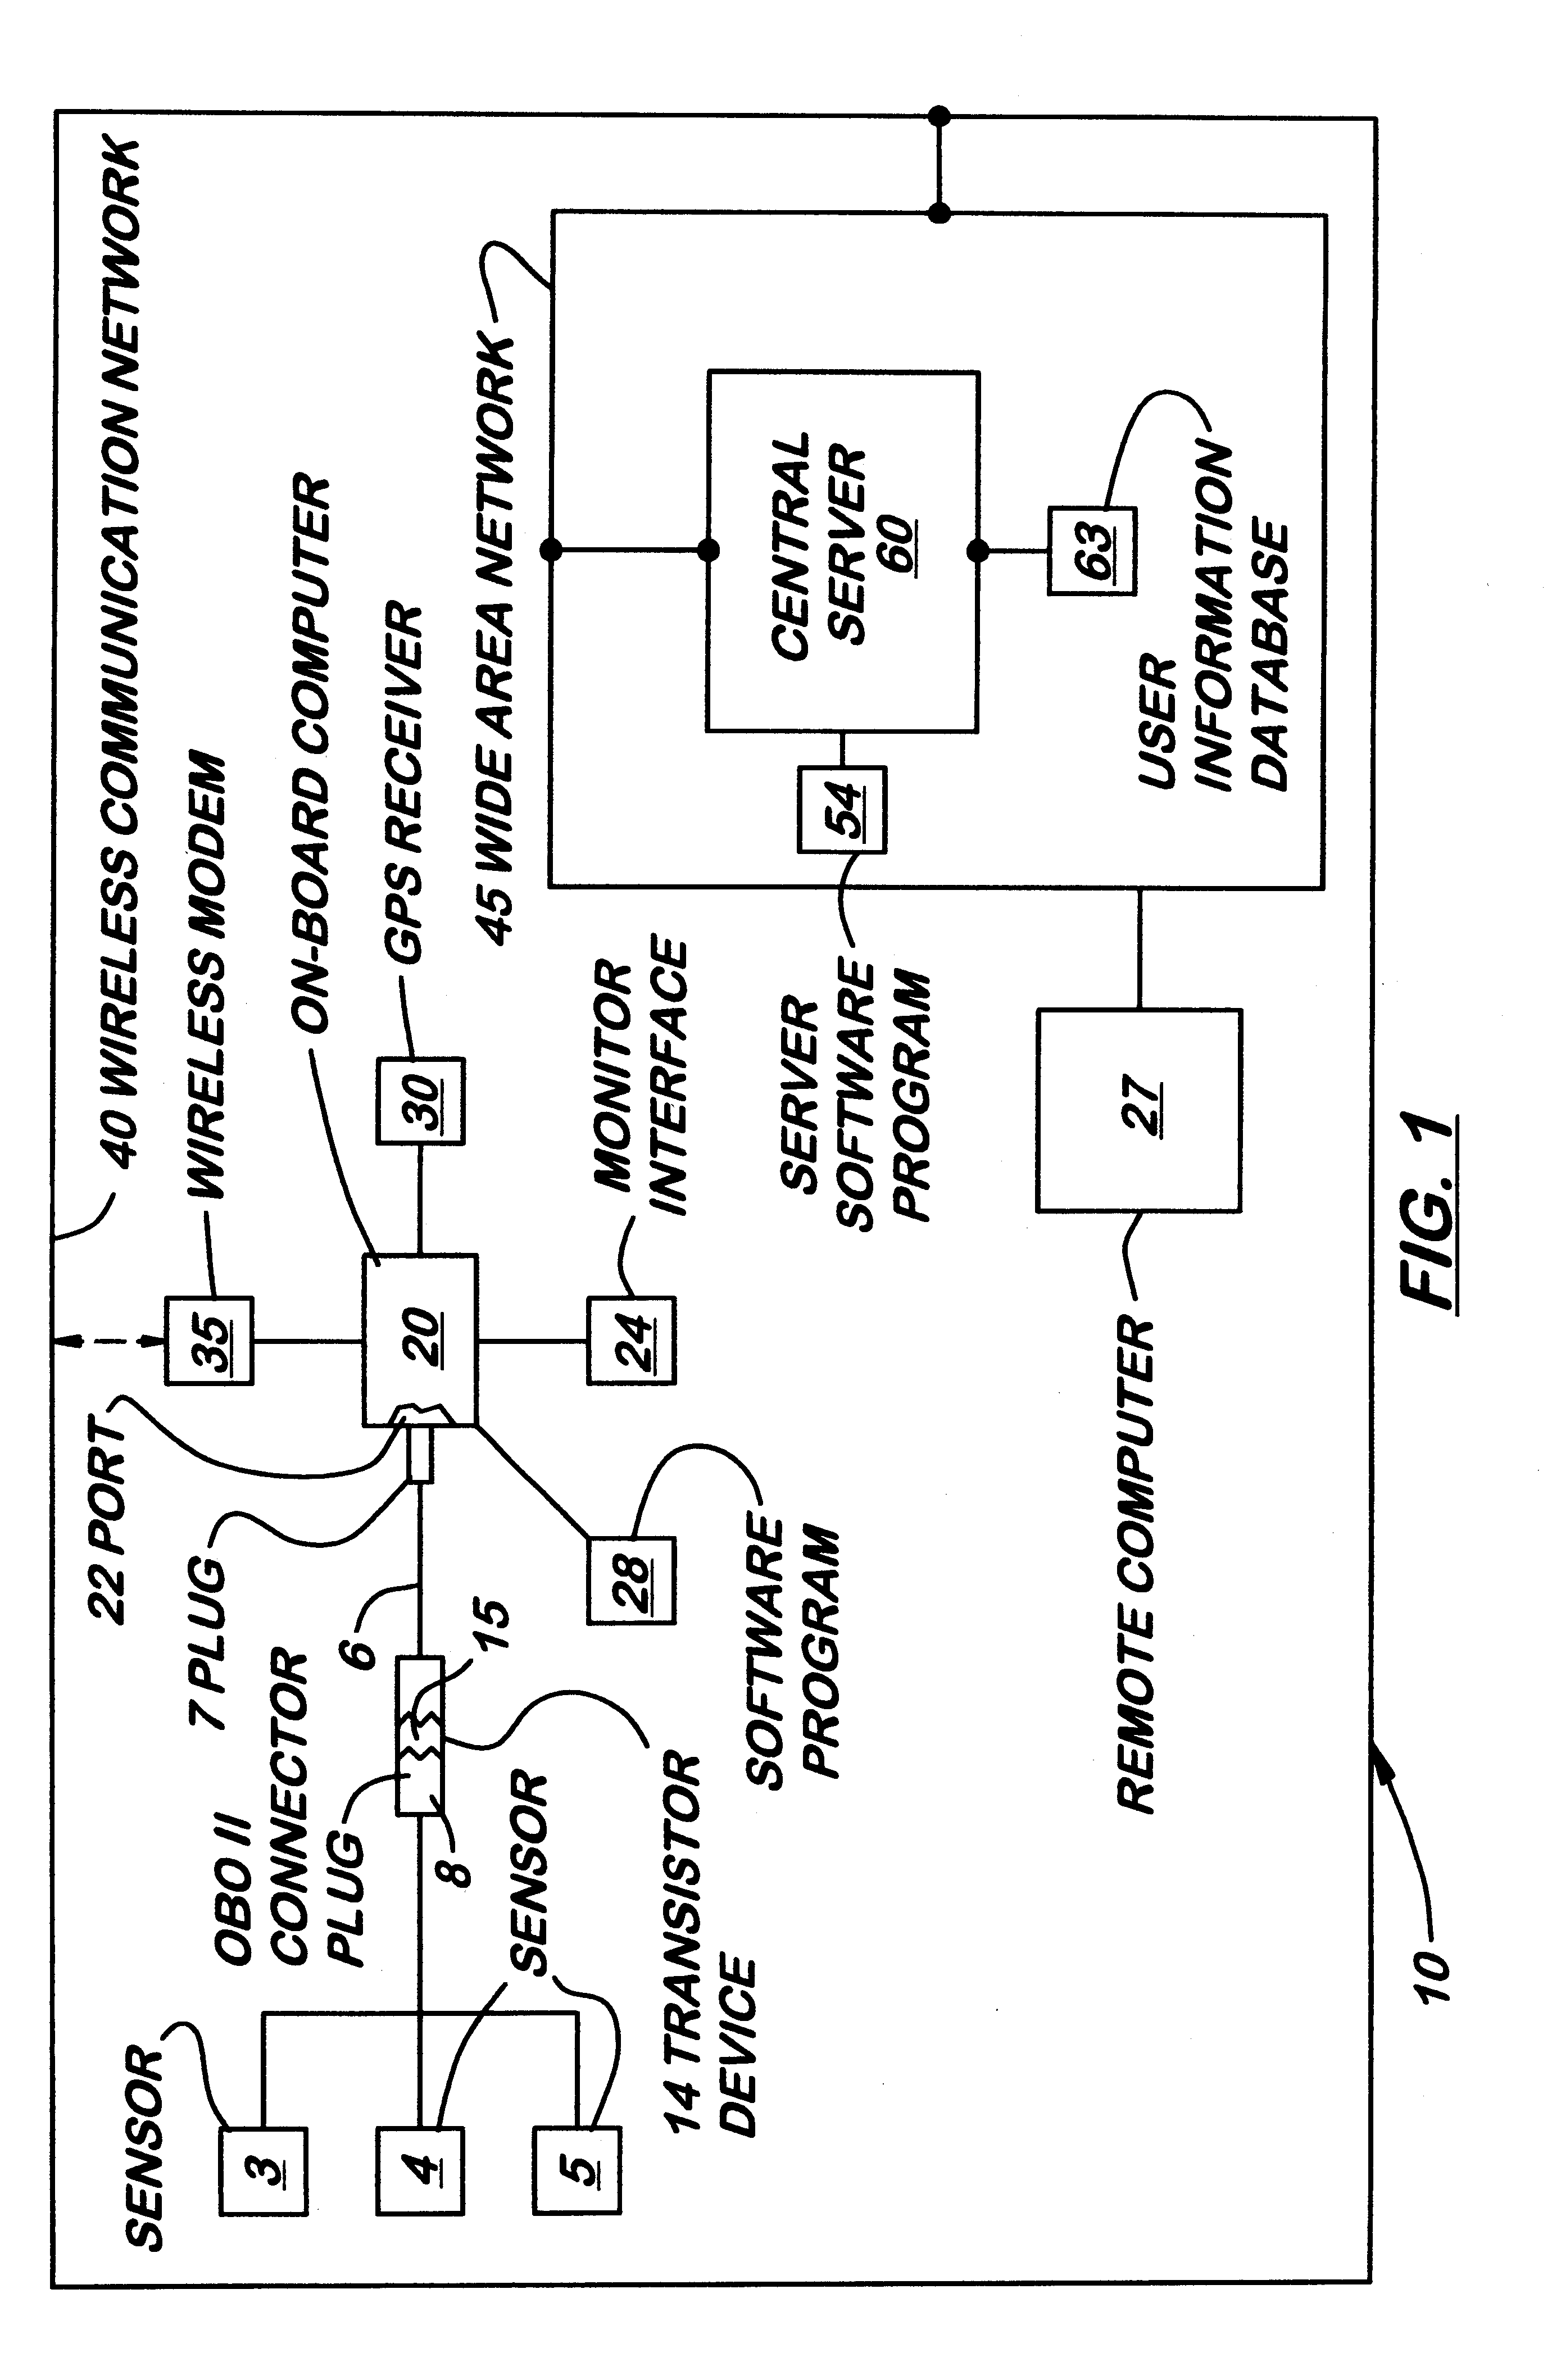 System for transmitting and displaying multiple, motor vehicle information